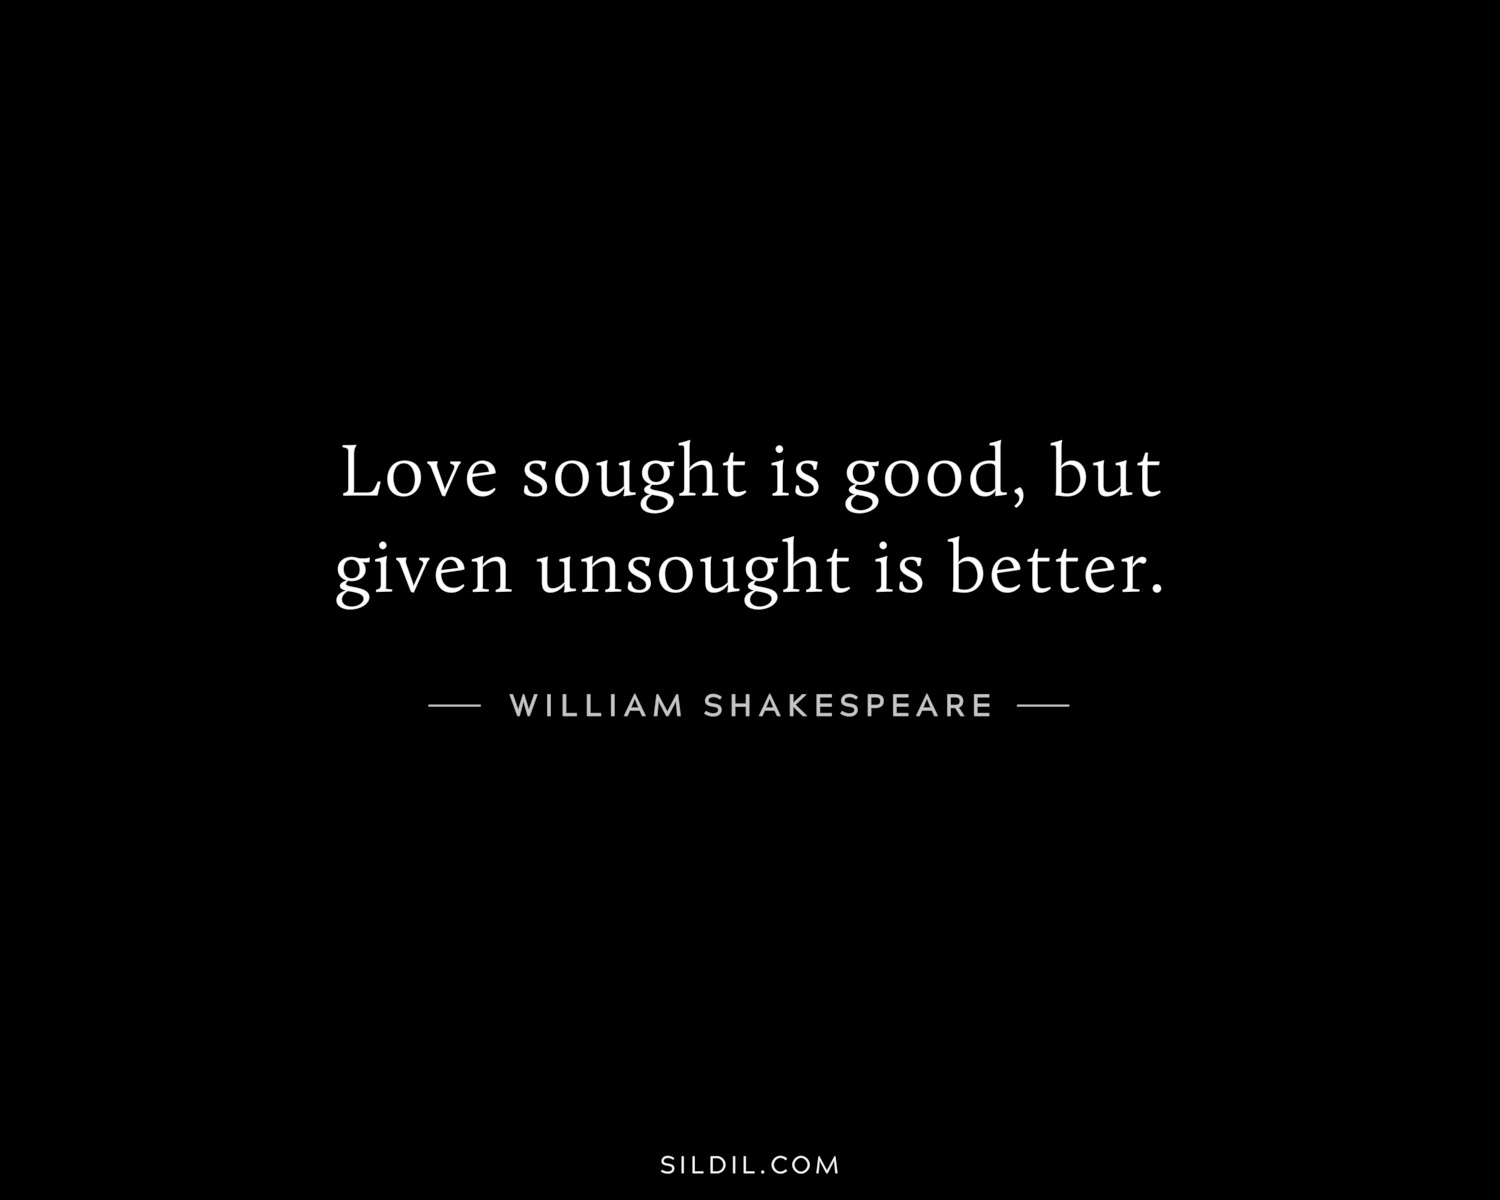 Love sought is good, but given unsought is better.